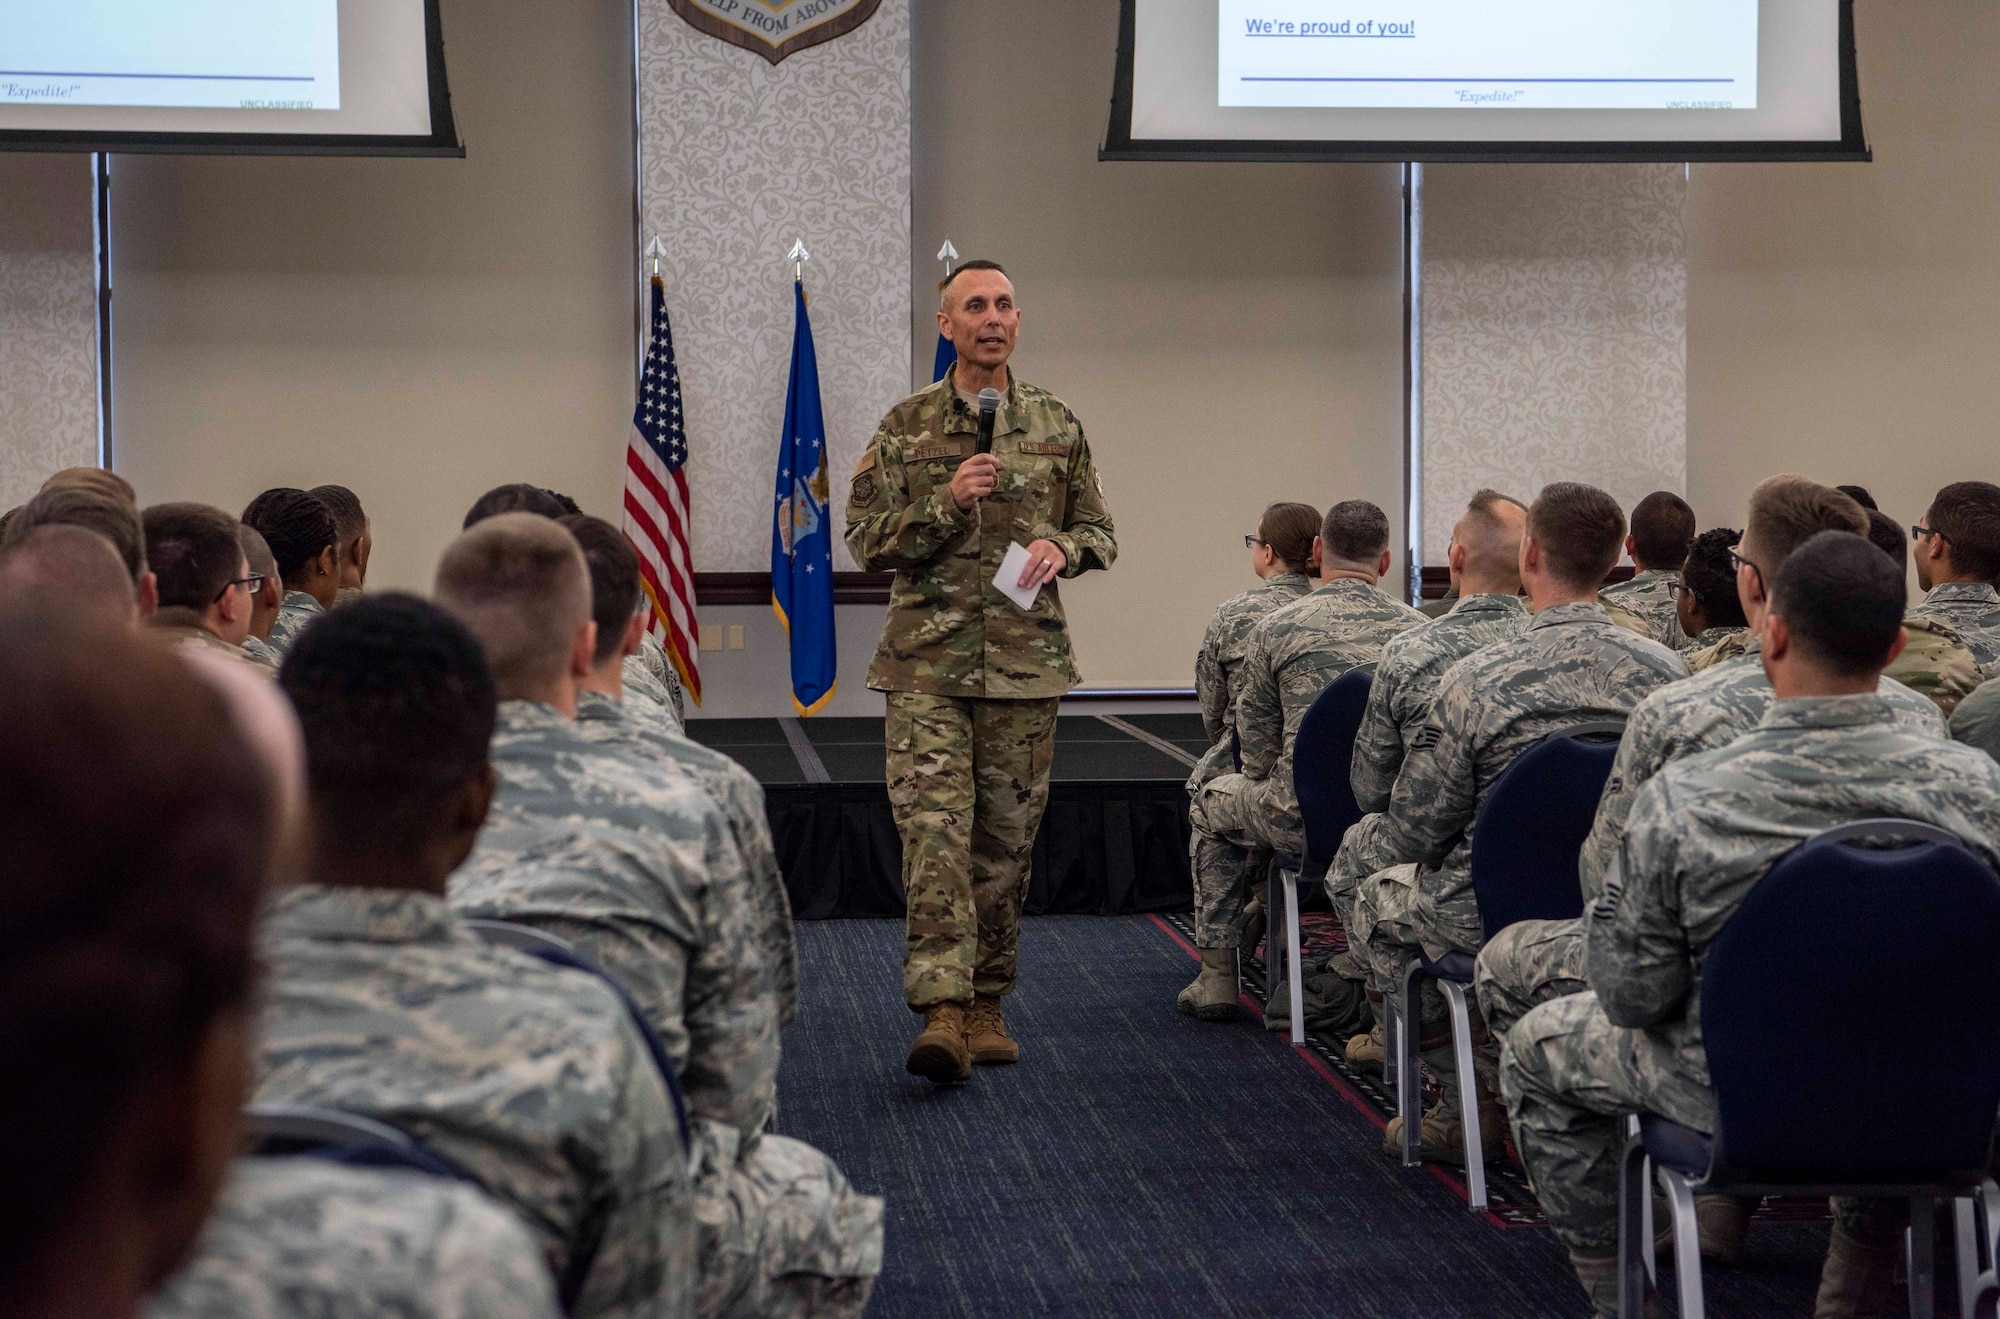 Chief Master Sgt. Todd Petzel, 18th Air Force command chief, speaks during a commander’s call Oct. 12, 2018 at Scott Air Force Base, Illinois. Petzel focused on the acronym AMC, which stood for Airmen, Mission and Culture. He emphasized that nothing happens alone and a cohesive team is needed in order to complete the mission. (U.S. Air Force photo by Senior Airman Melissa Estevez)